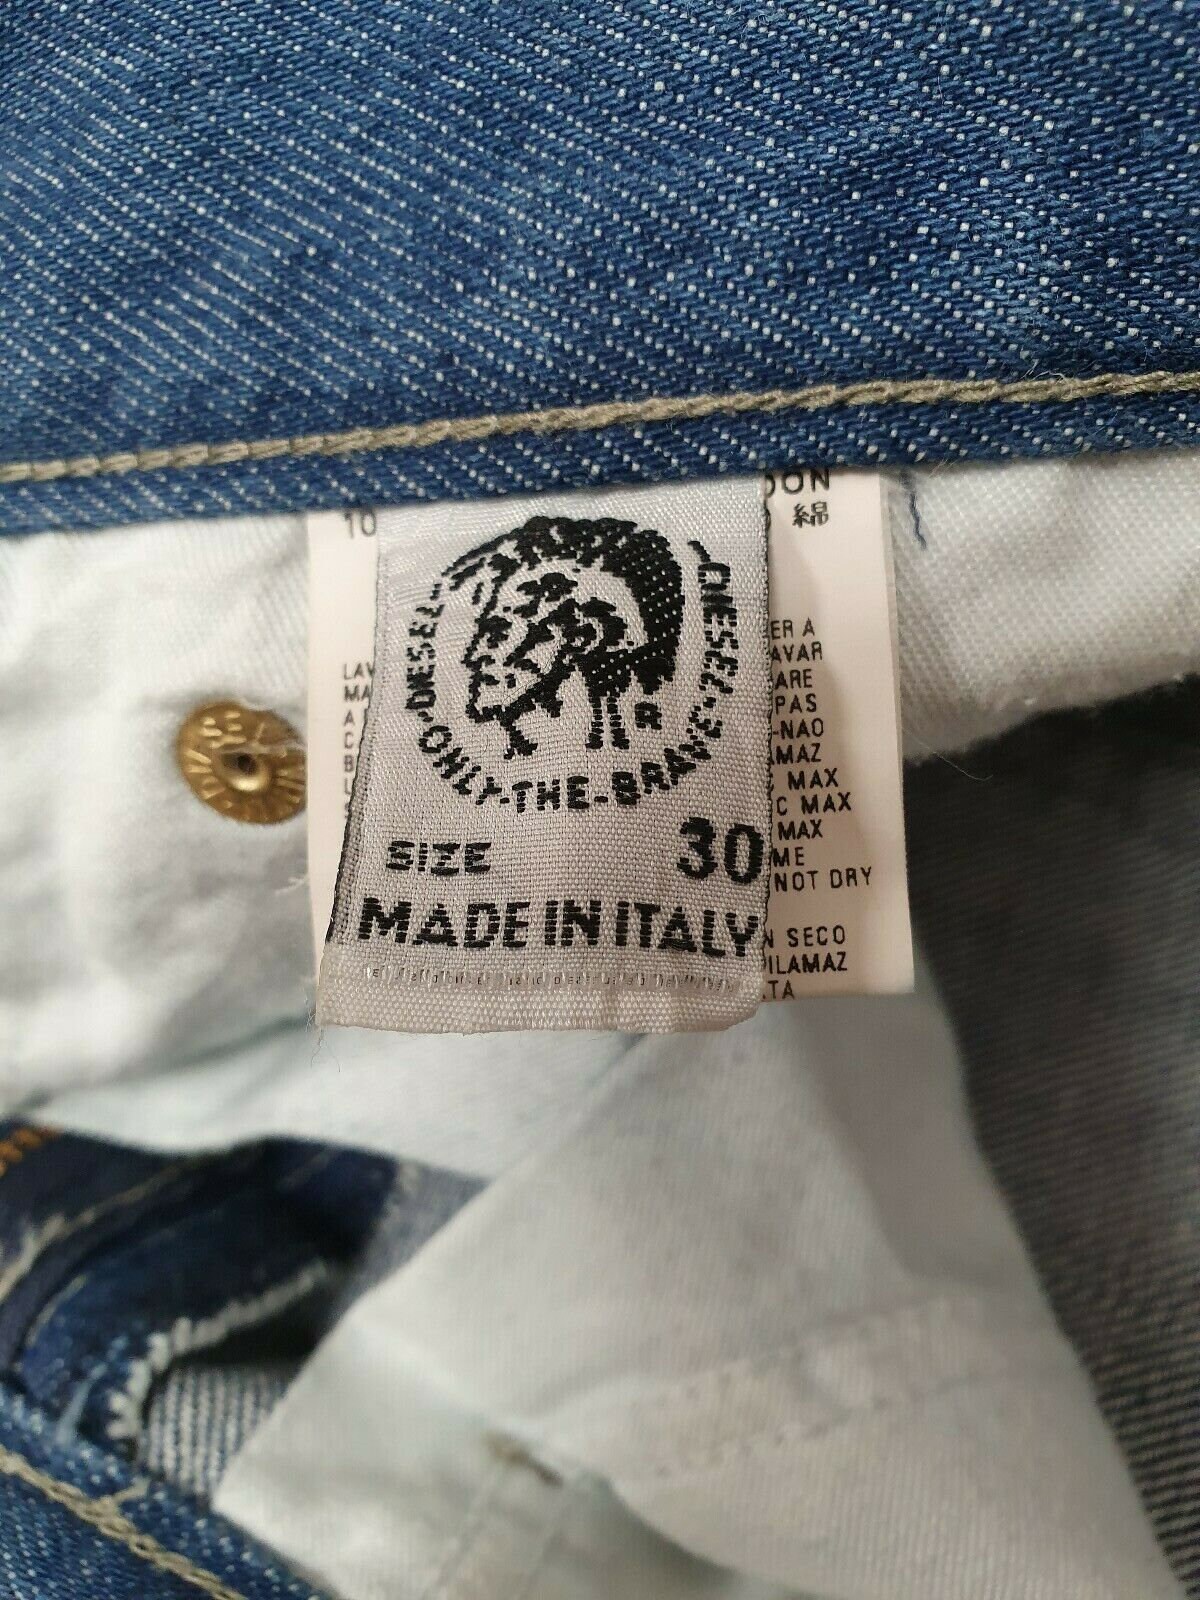 Ladies womens diesel blue denis jeans size 30 made in italy | Etsy